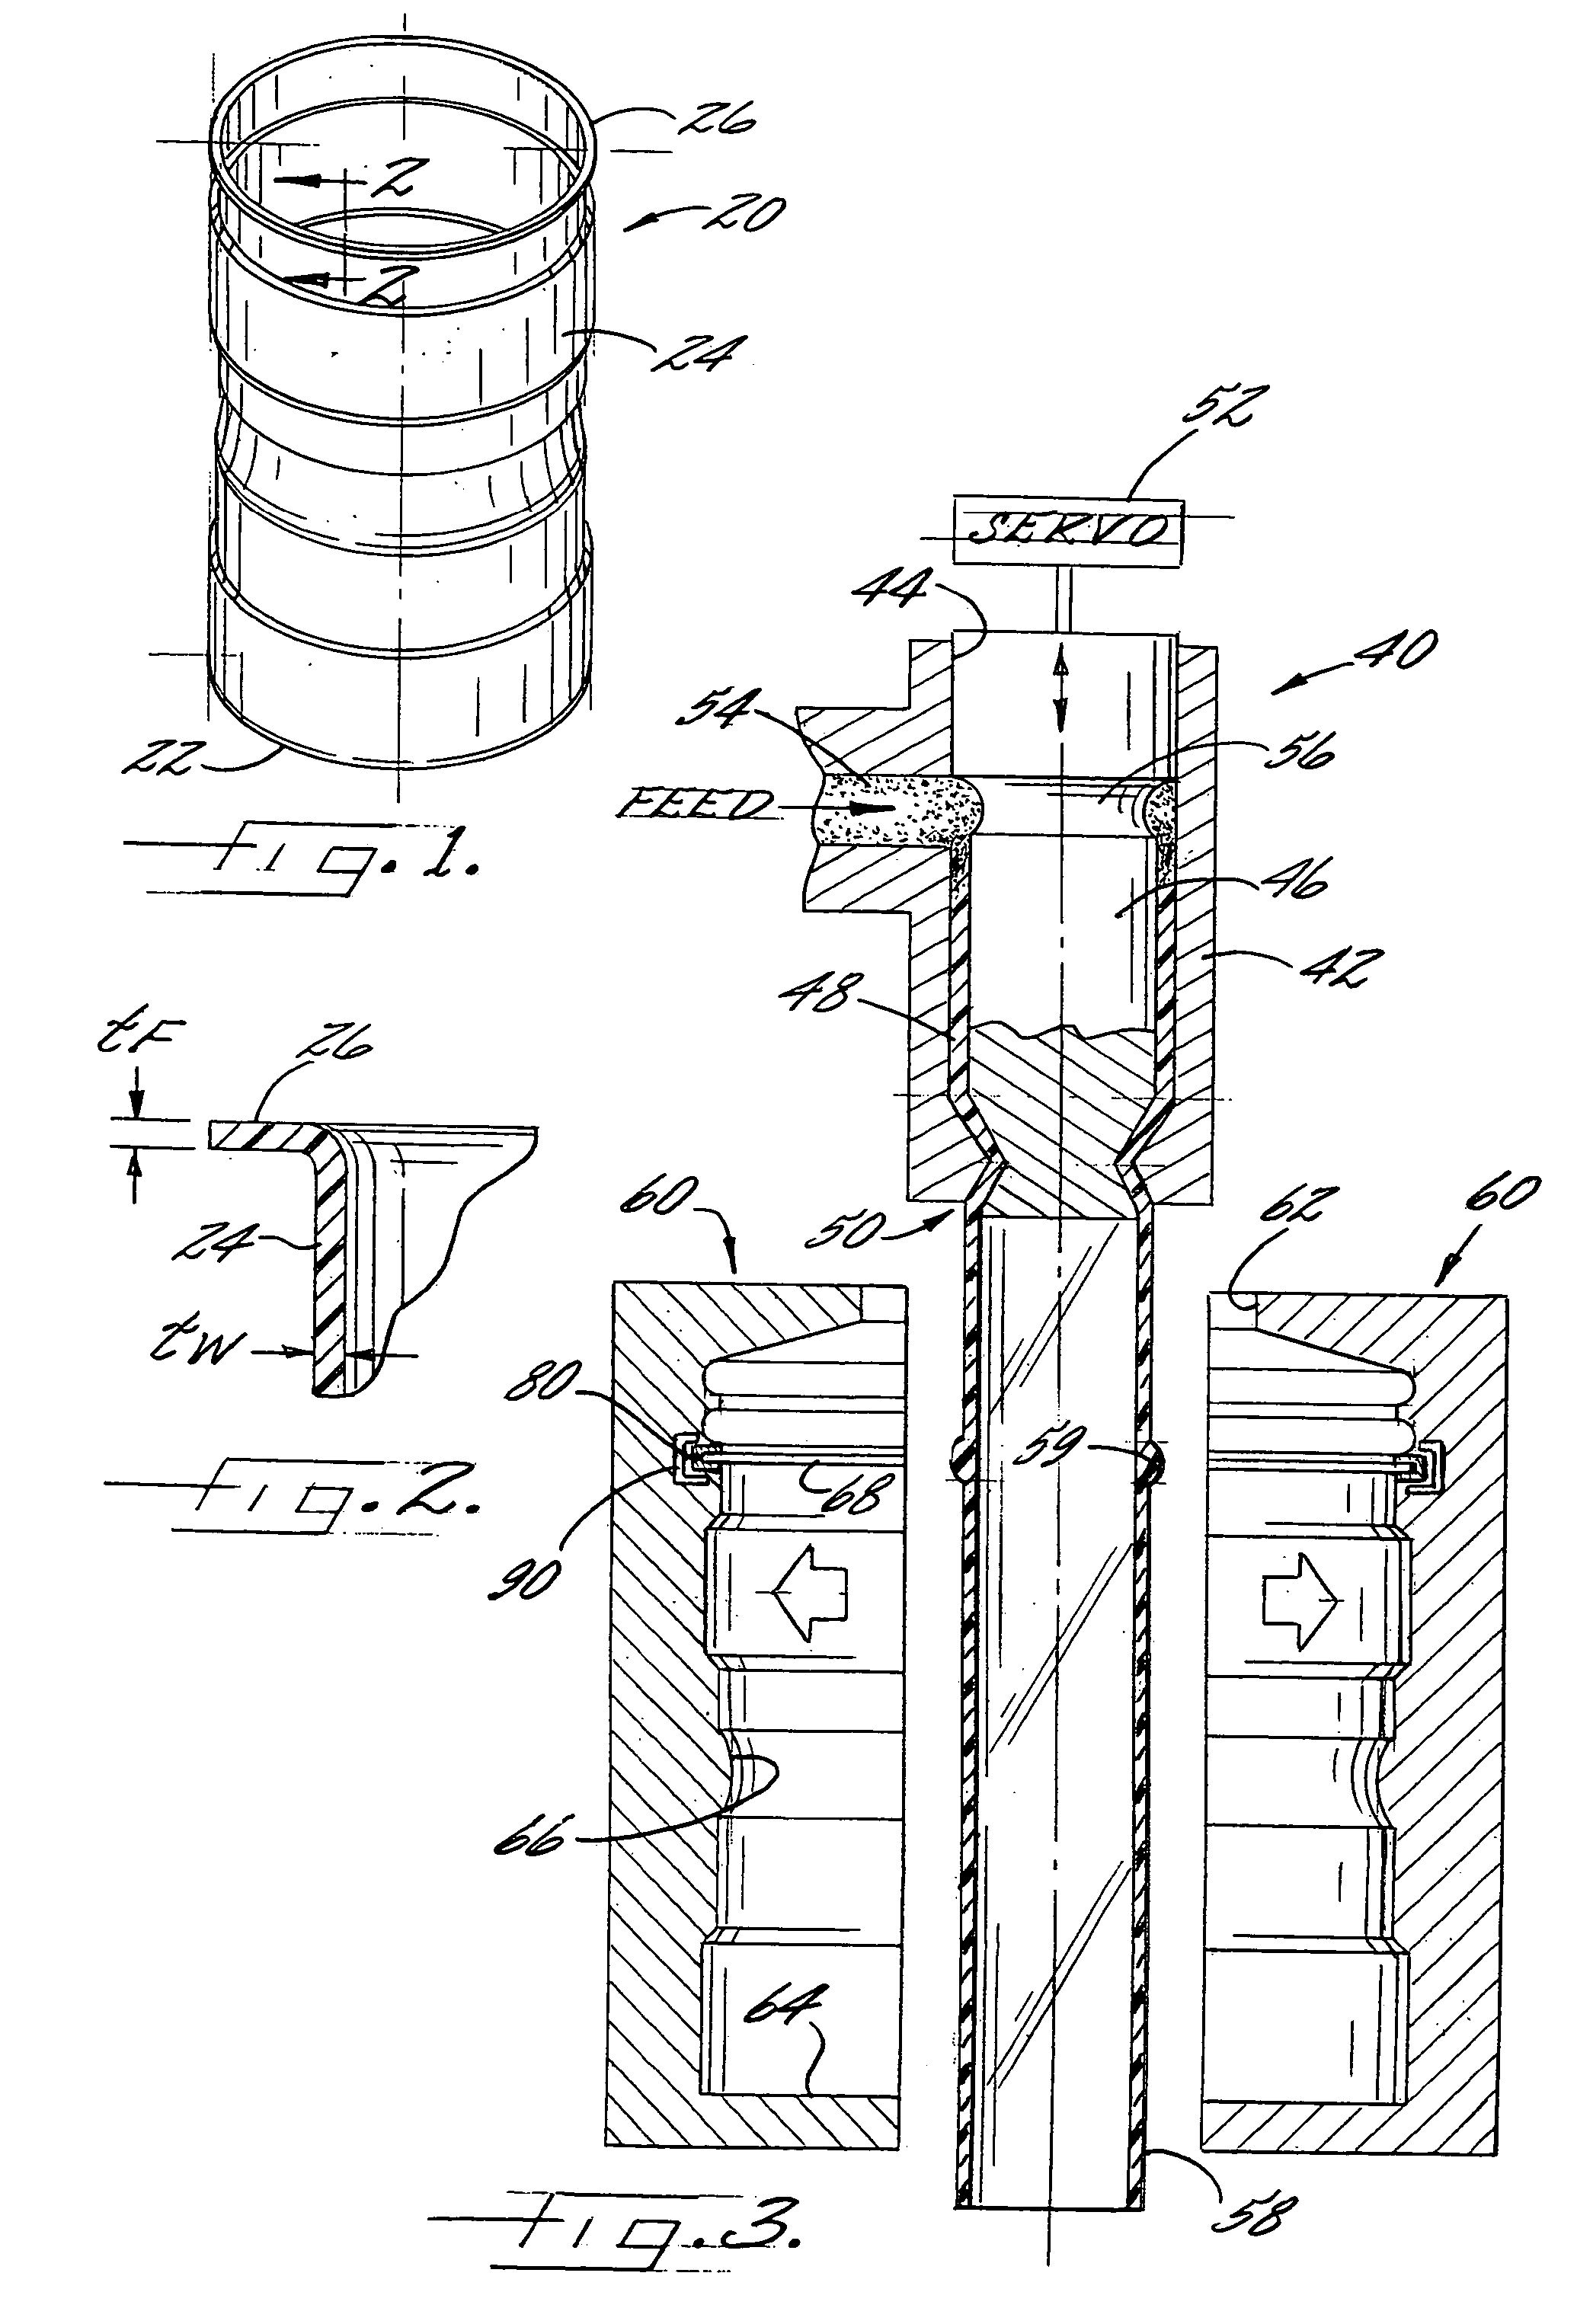 Method and apparatus for blow-molding an article having a solid radially outwardly projecting flange